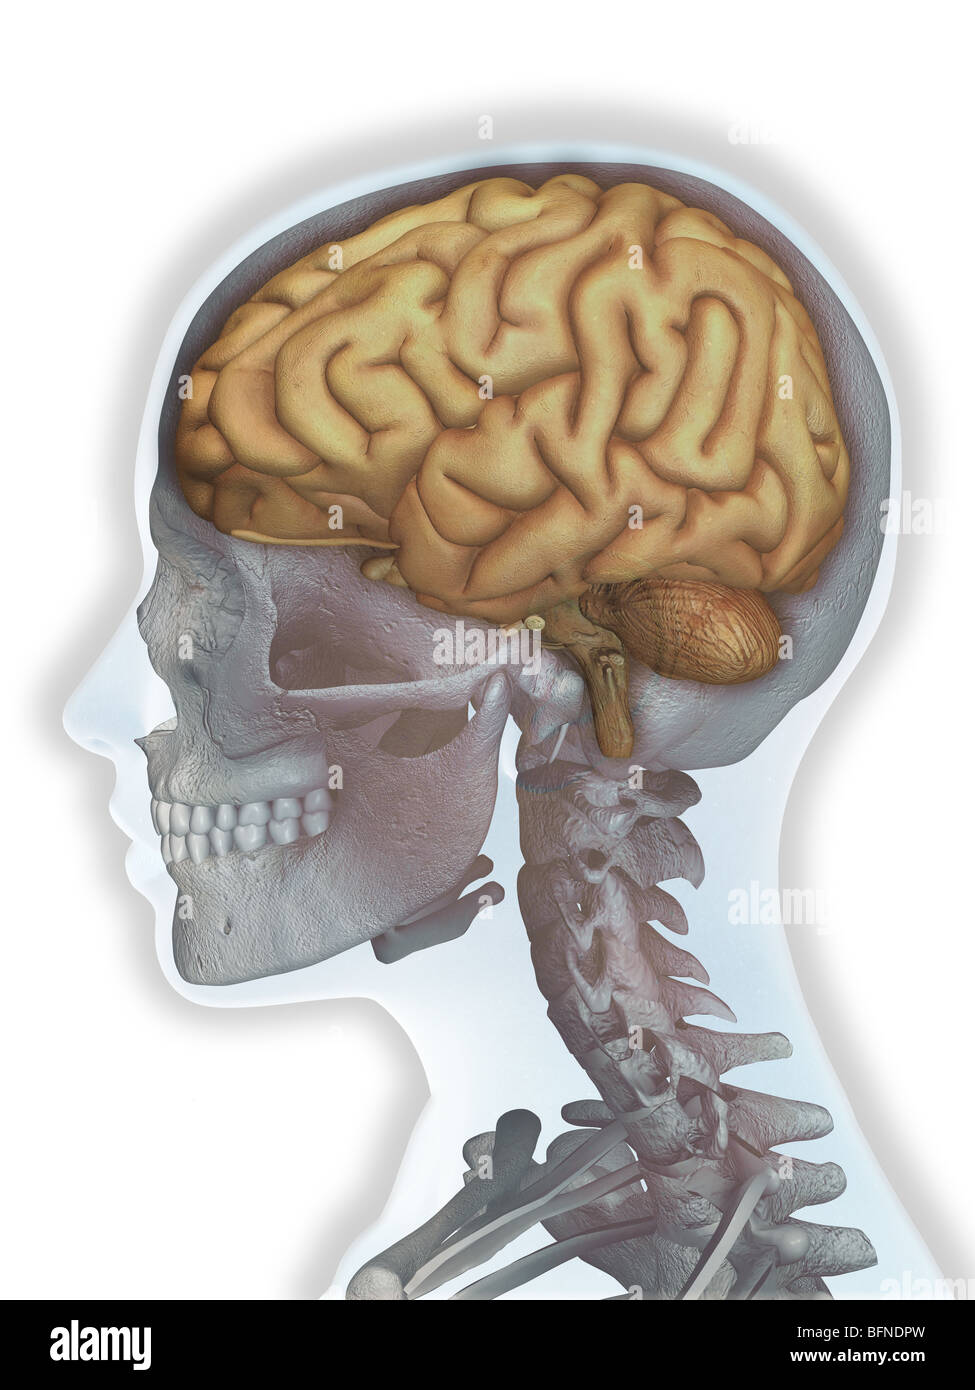 Illustration of the human brain superimposed over a female head Stock Photo